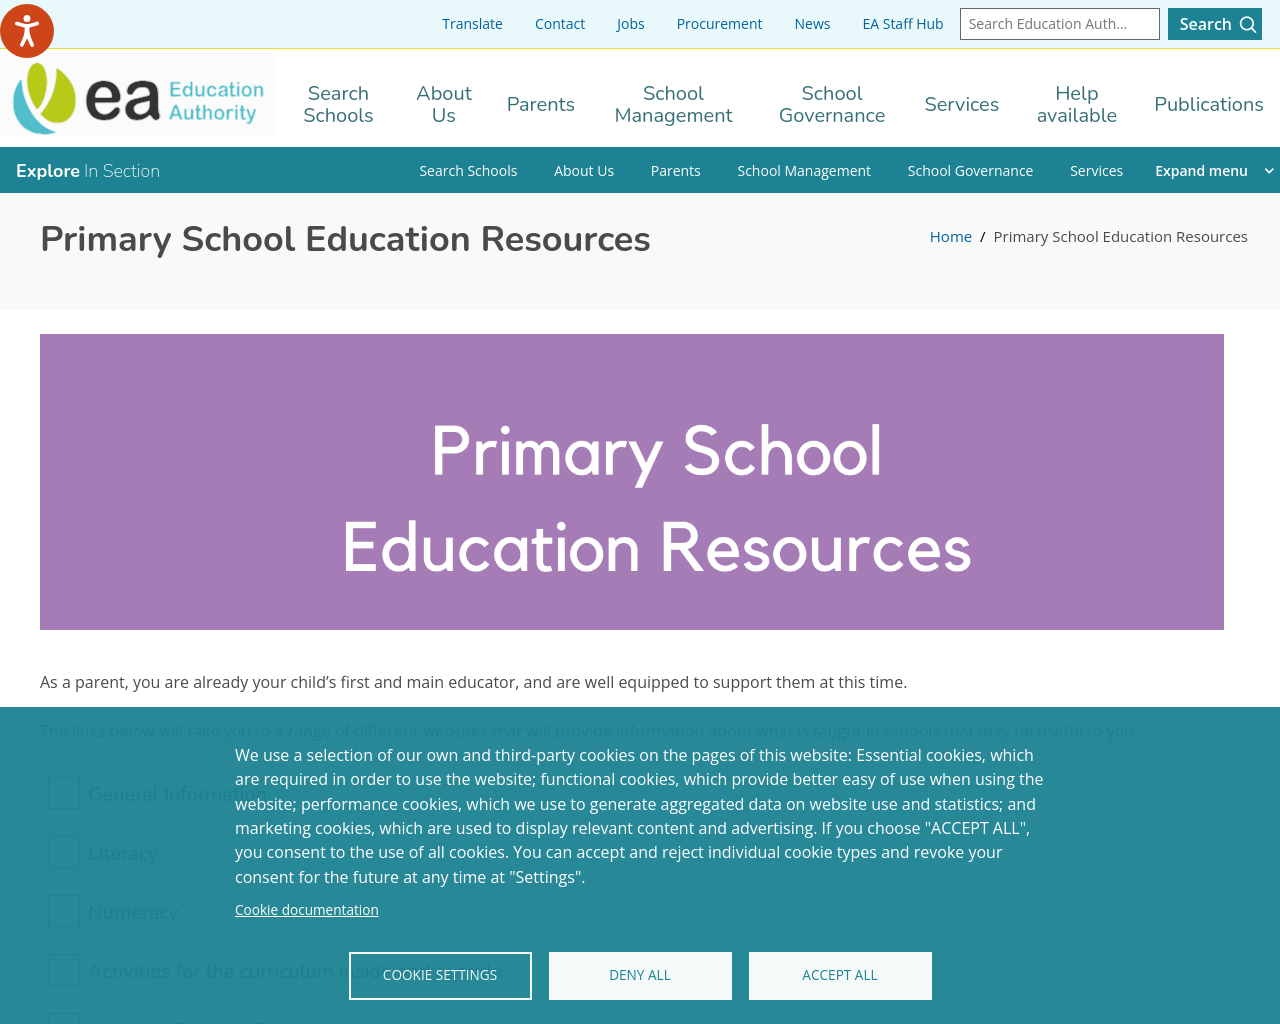 Education Authority Resources